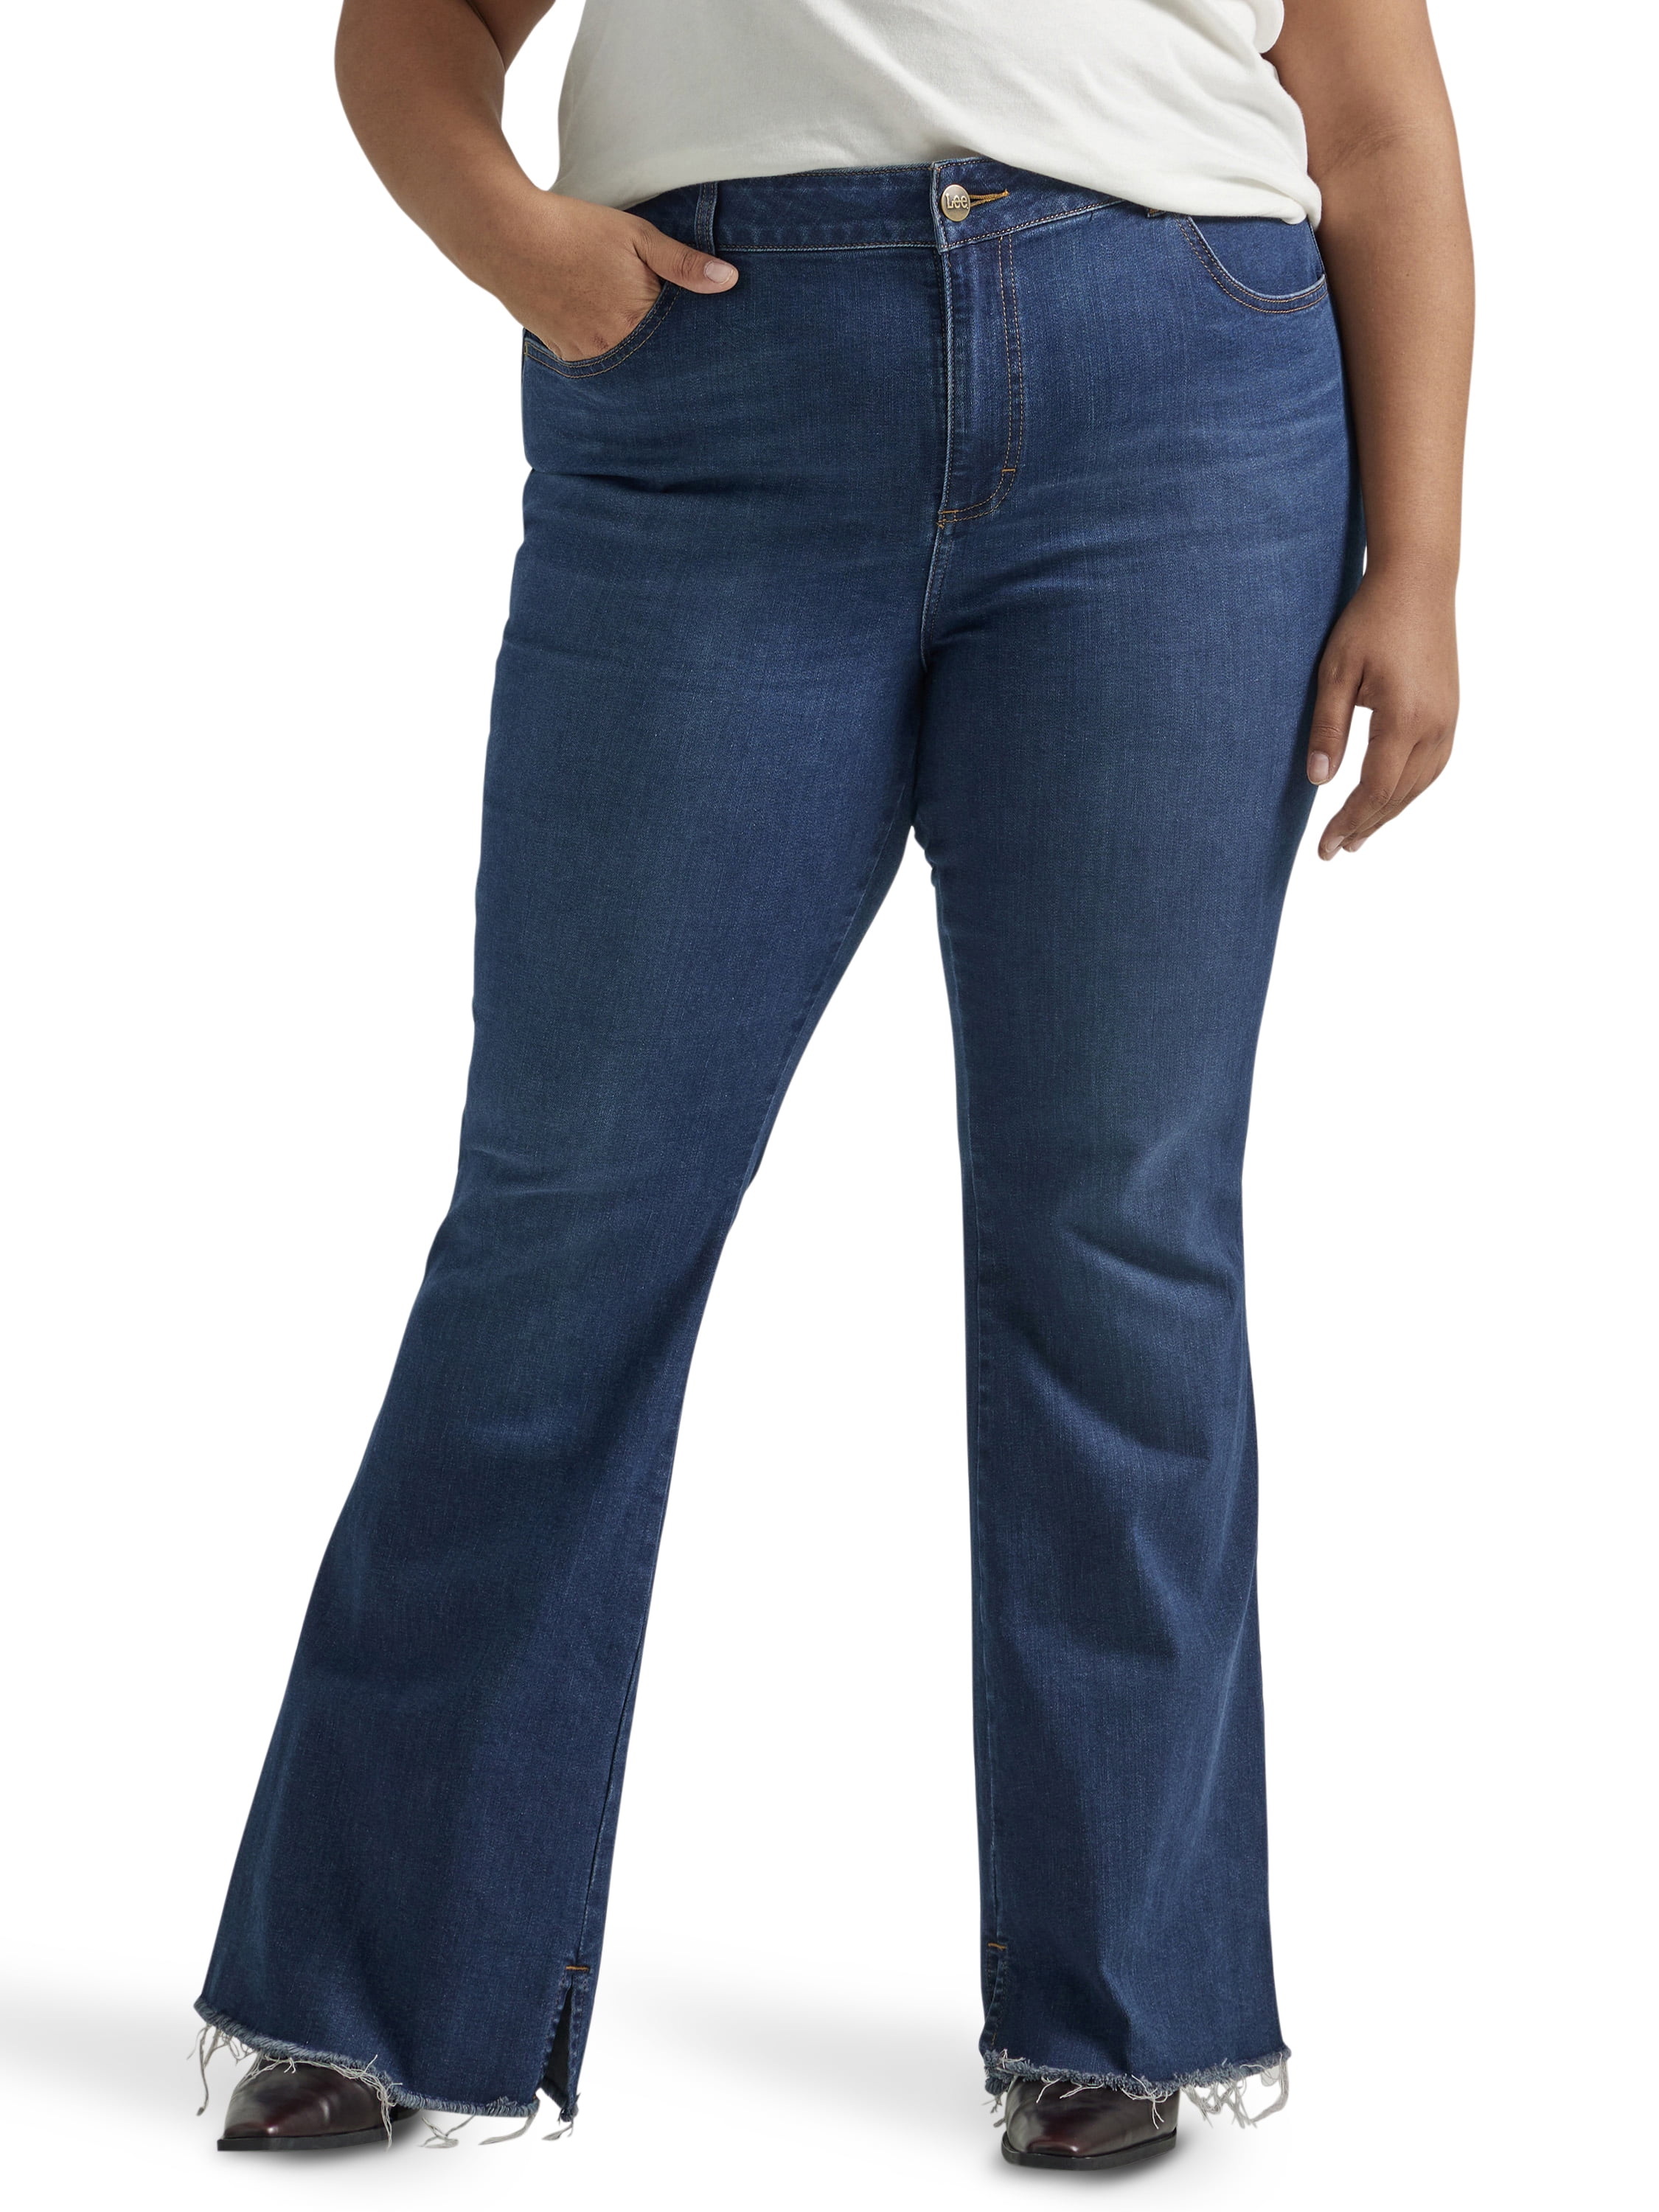 Sofia Jeans Women's Plus Size Curvy High Rise Zip Fly Flare Jeans 